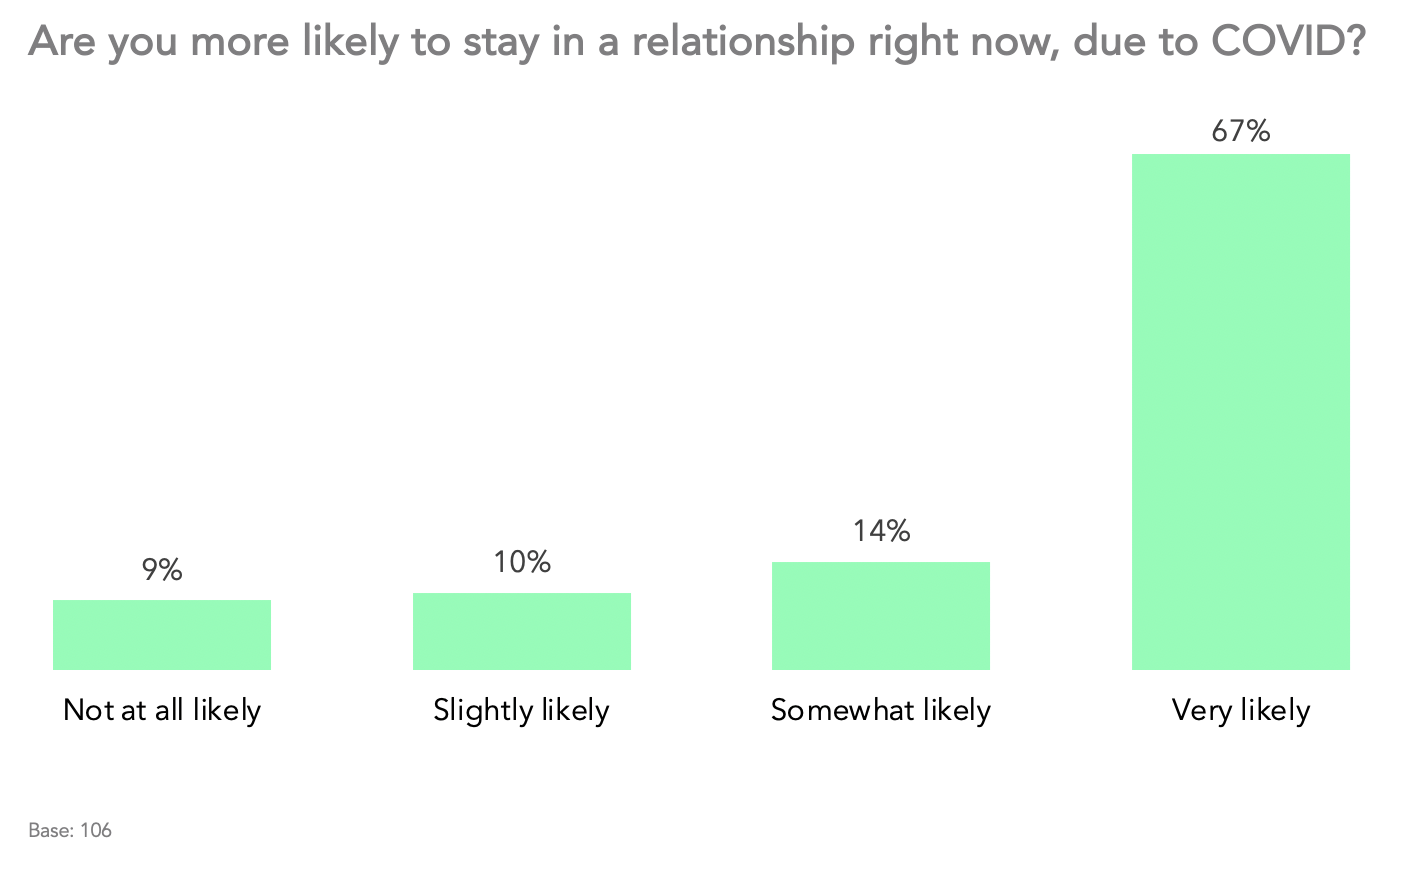 Are you more likely to stay in a relationship right now, due to COVID?